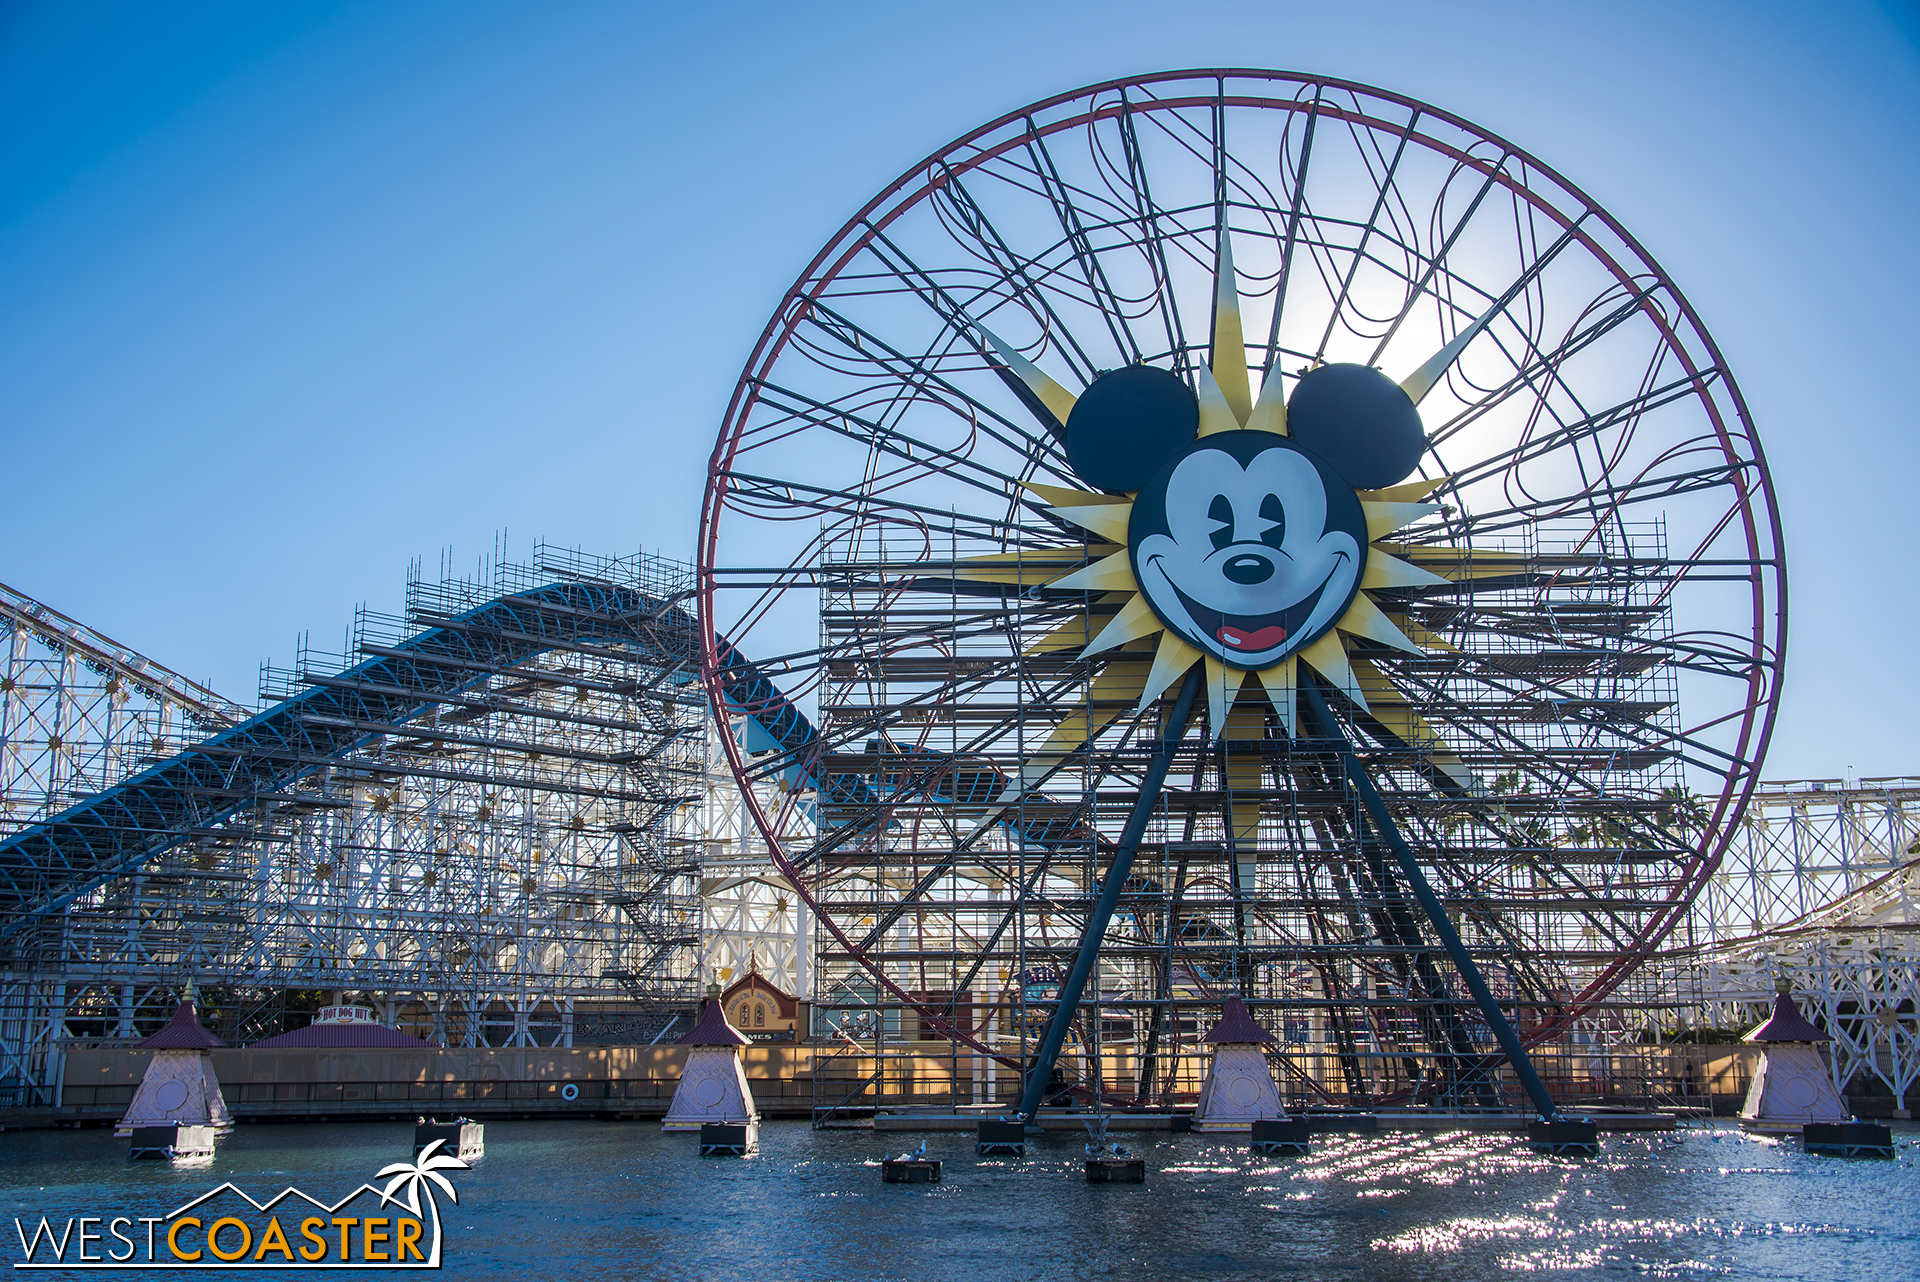  Mickey's Fun Wheel will be remarketed with Pixar characters and imagery.&nbsp; The ferris wheel carriages have already been removed for refurbishment and new graphics.&nbsp; Mickey's face will remain, however. 